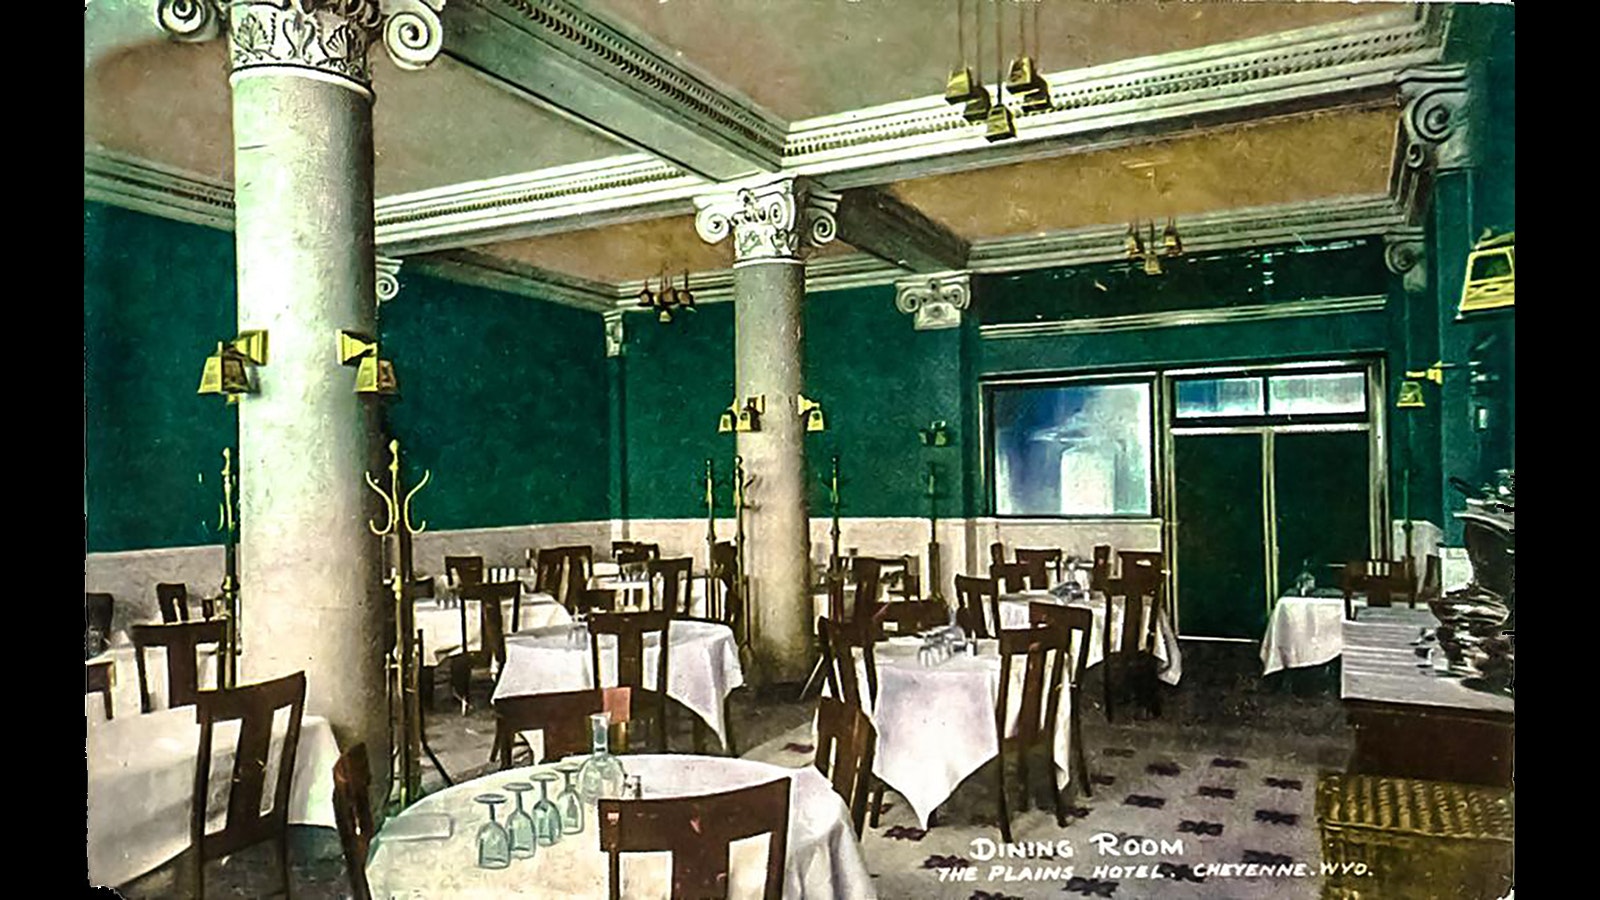 The dining room at the Plains Hotel in its heyday.